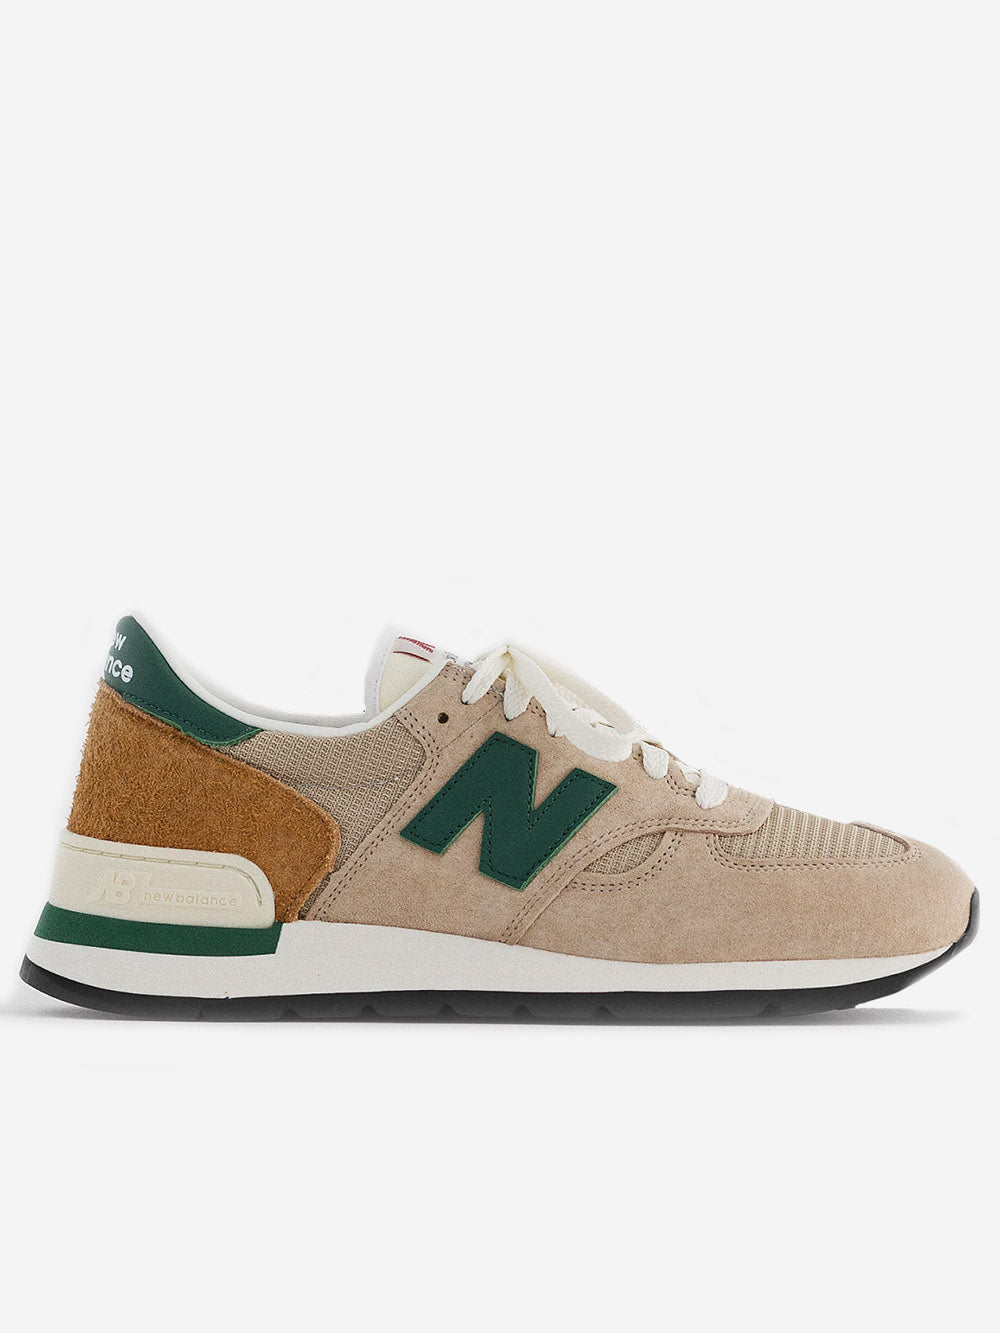 NEW BALANCE M990 TG1 Made in USA Sneakers Beige verde Urbanstaroma